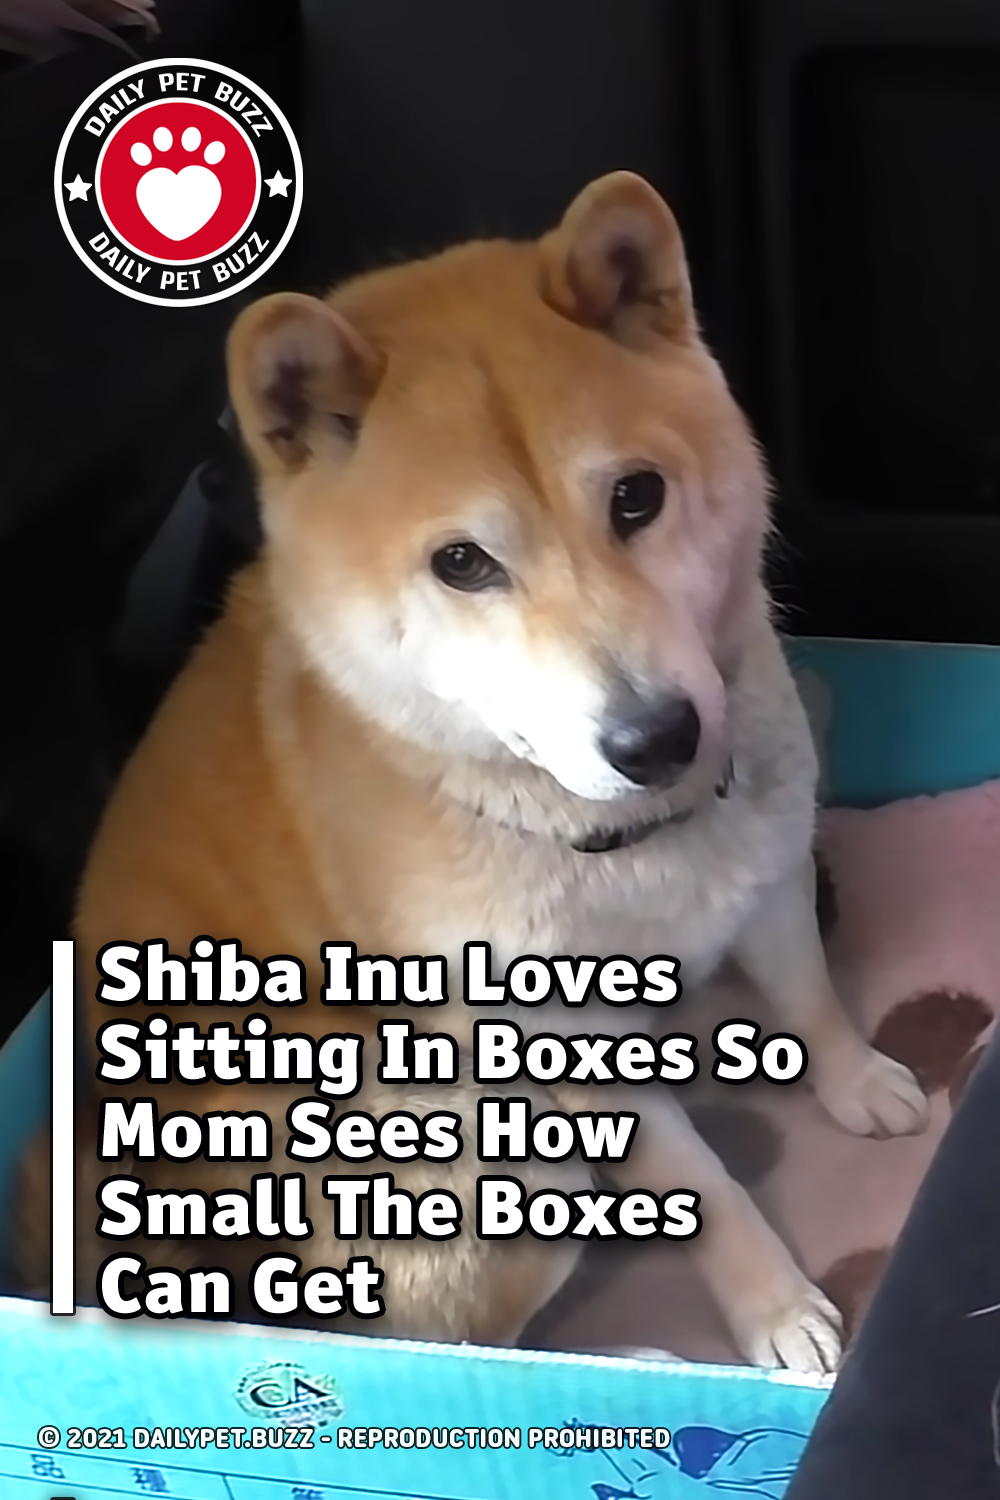 Shiba Inu Loves Sitting In Boxes So Mom Sees How Small The Boxes Can Get